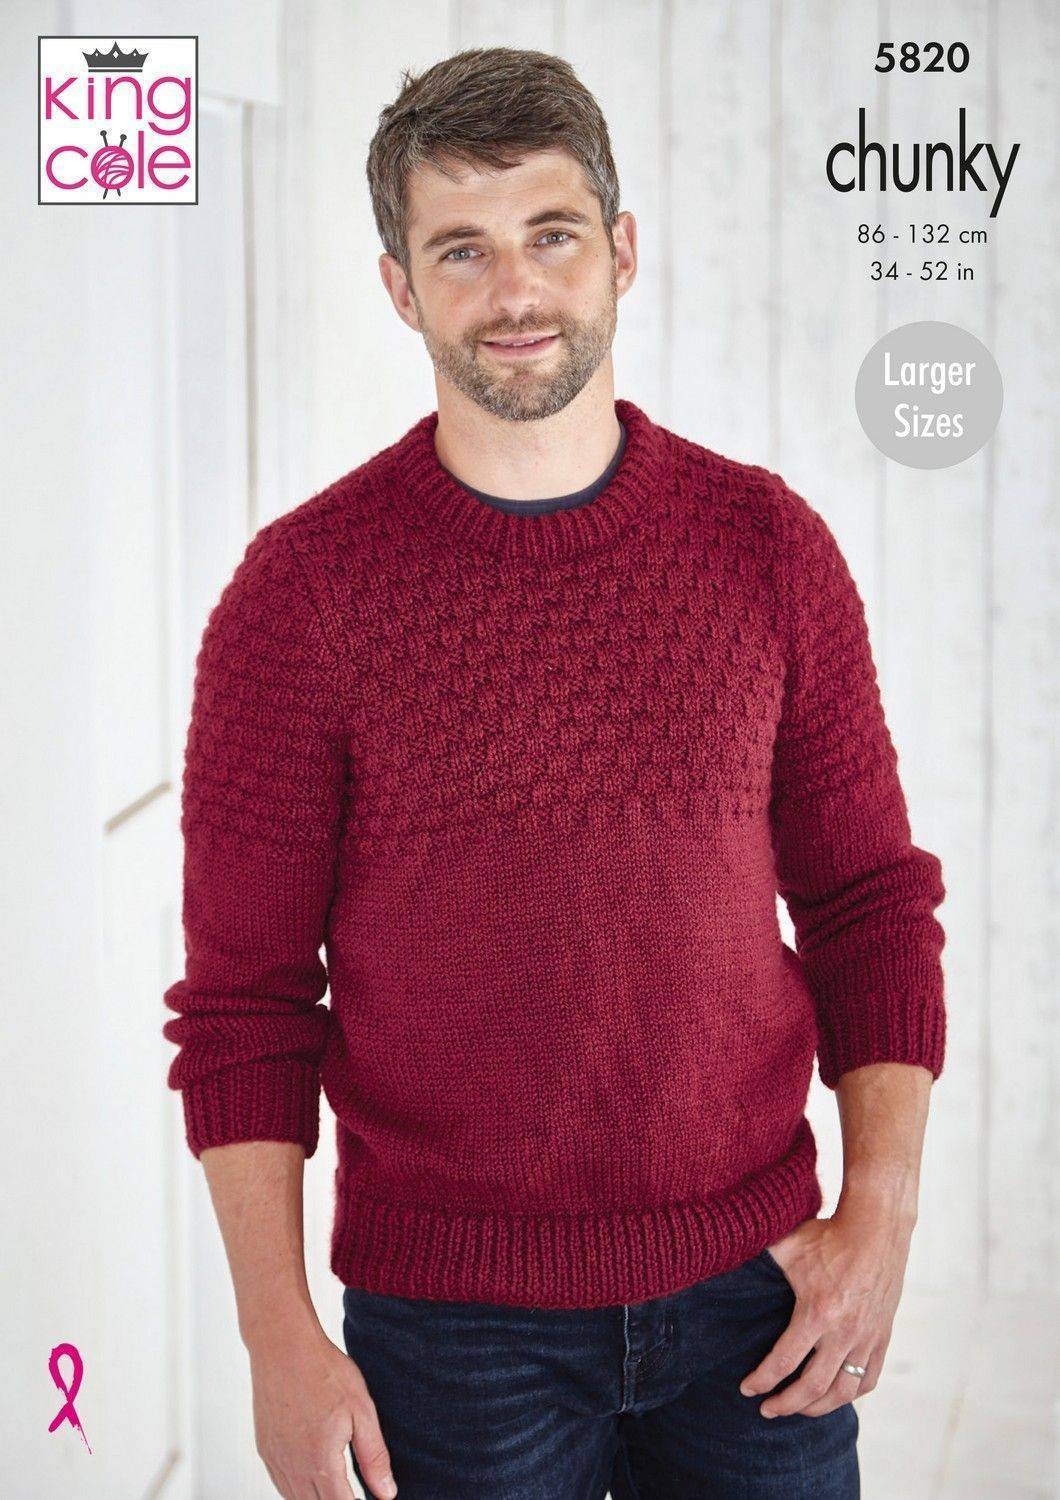 Sweater and Slipover in King Cole Big Value Chunky (5820) | The ...